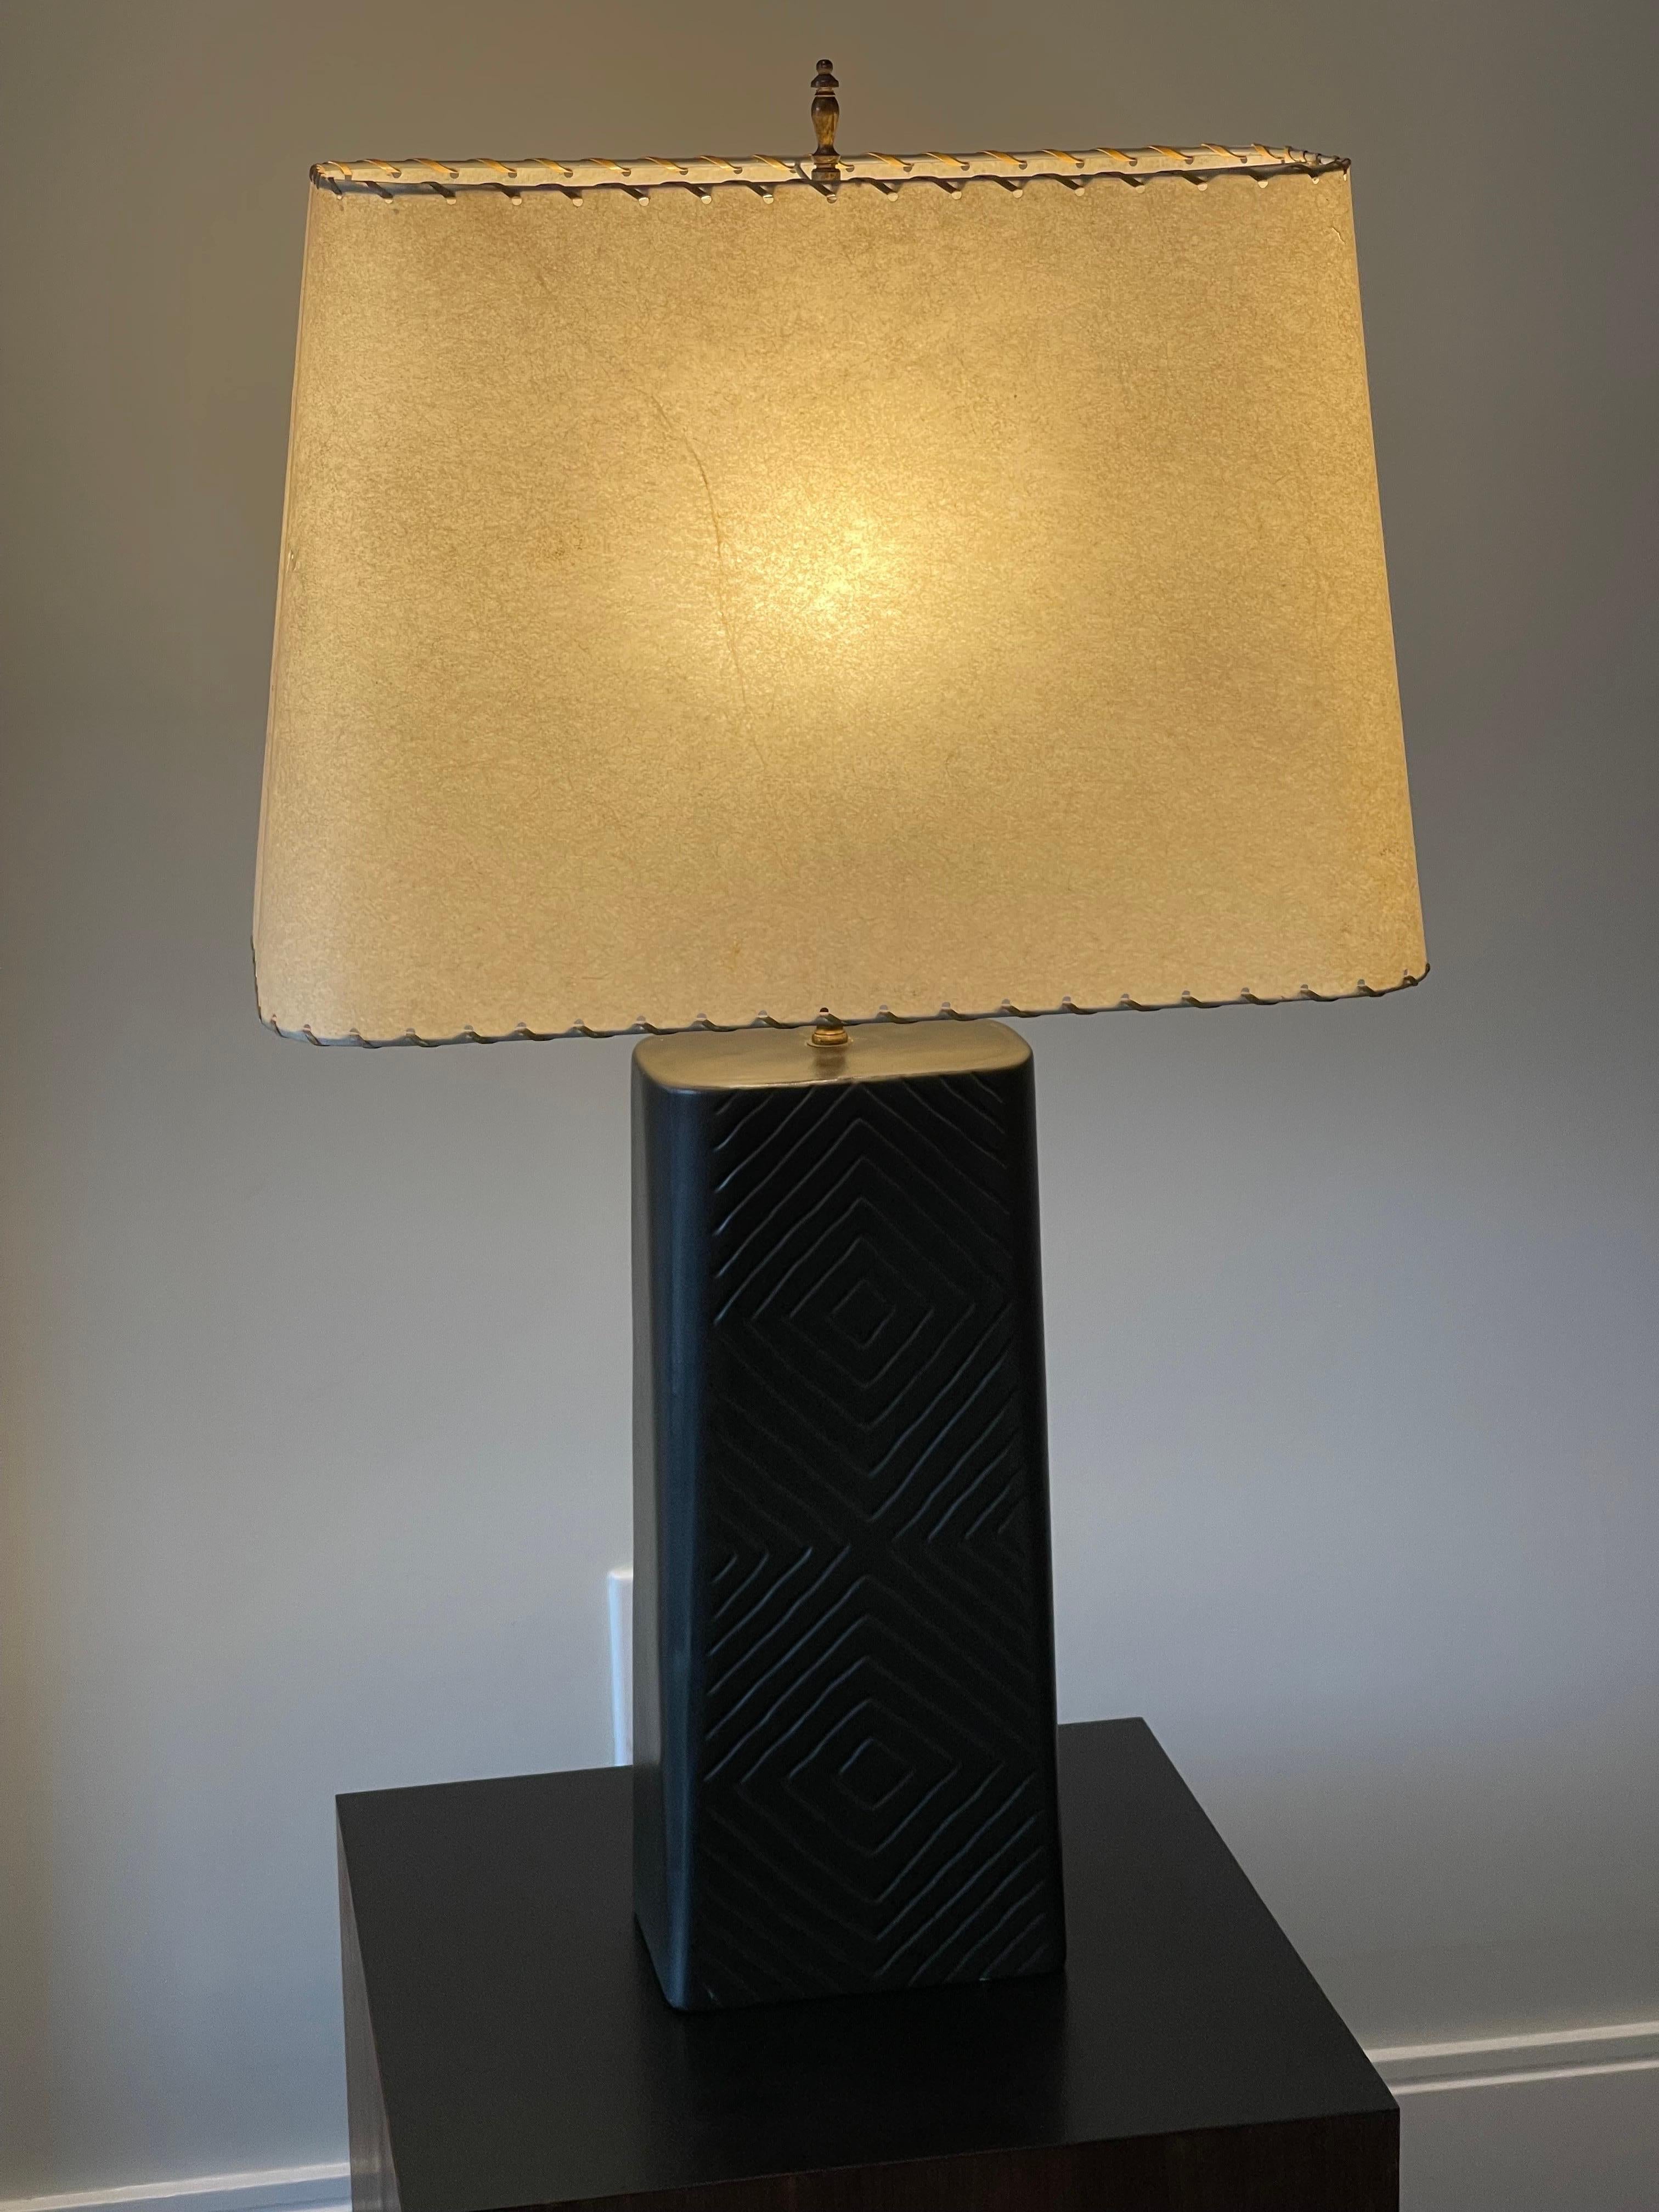 Large Mid-Century Modern Ceramic Table Lamp with Original Shade  For Sale 2